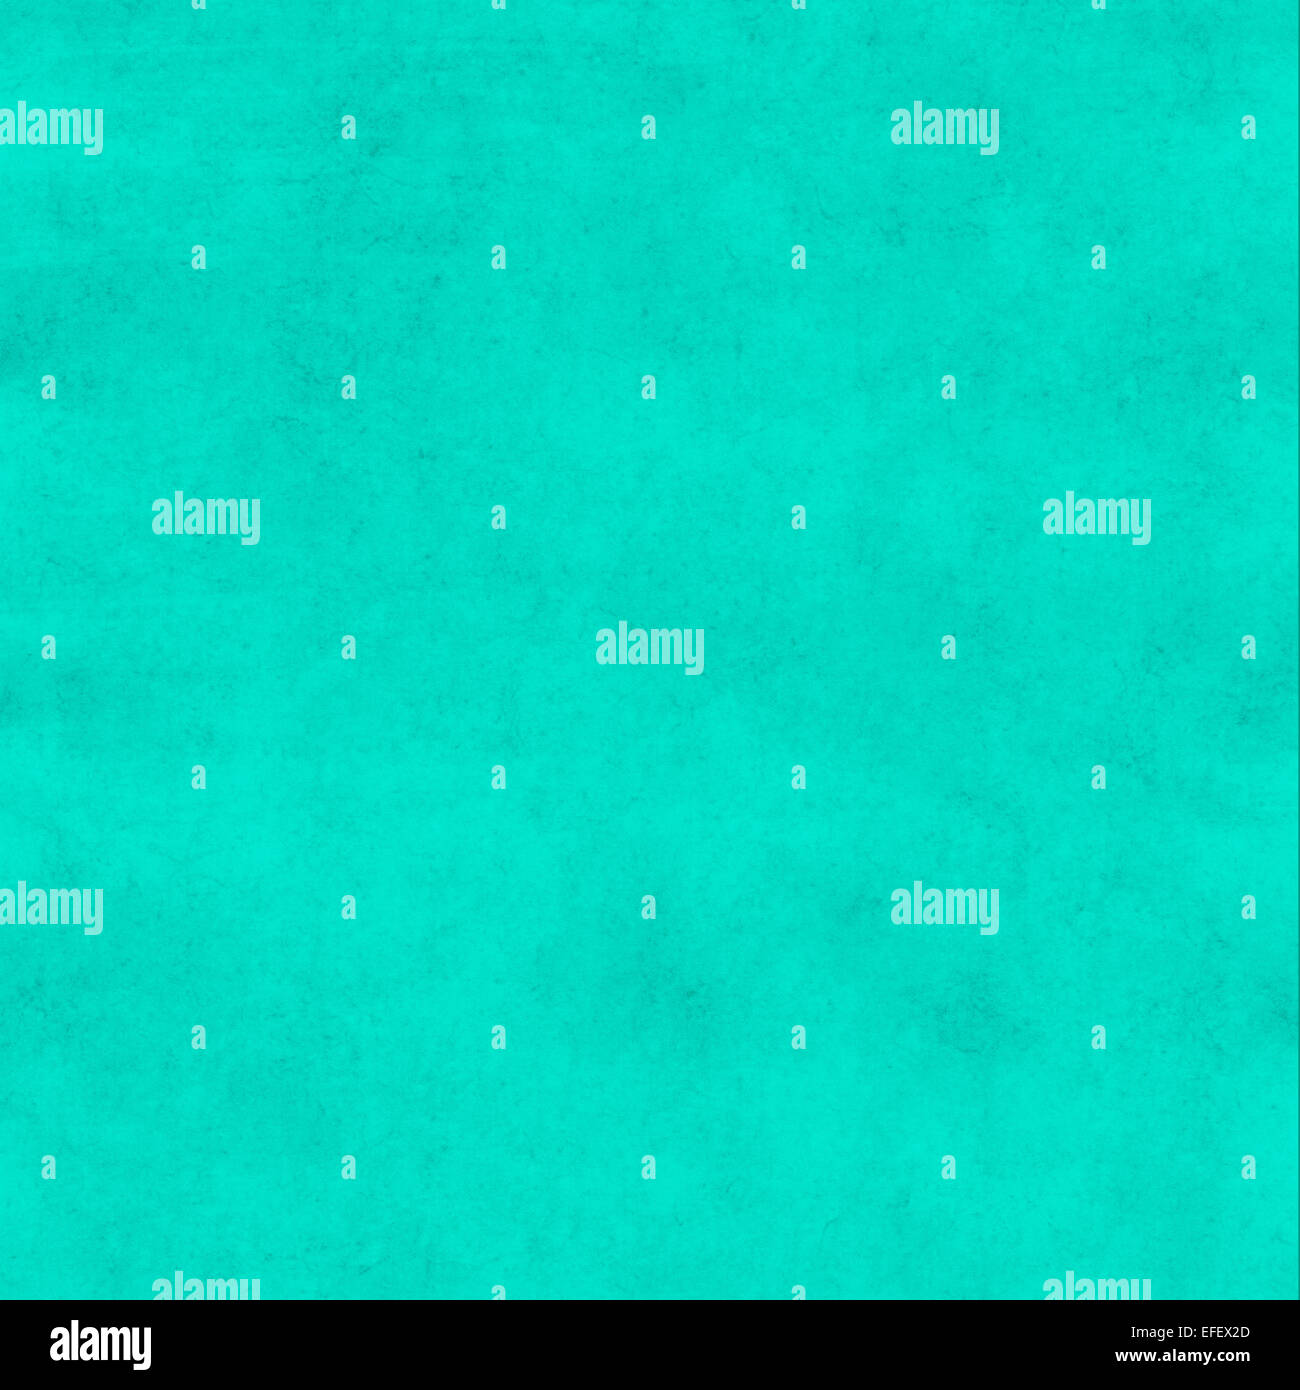 Seafoam Green Images – Browse 72,304 Stock Photos, Vectors, and